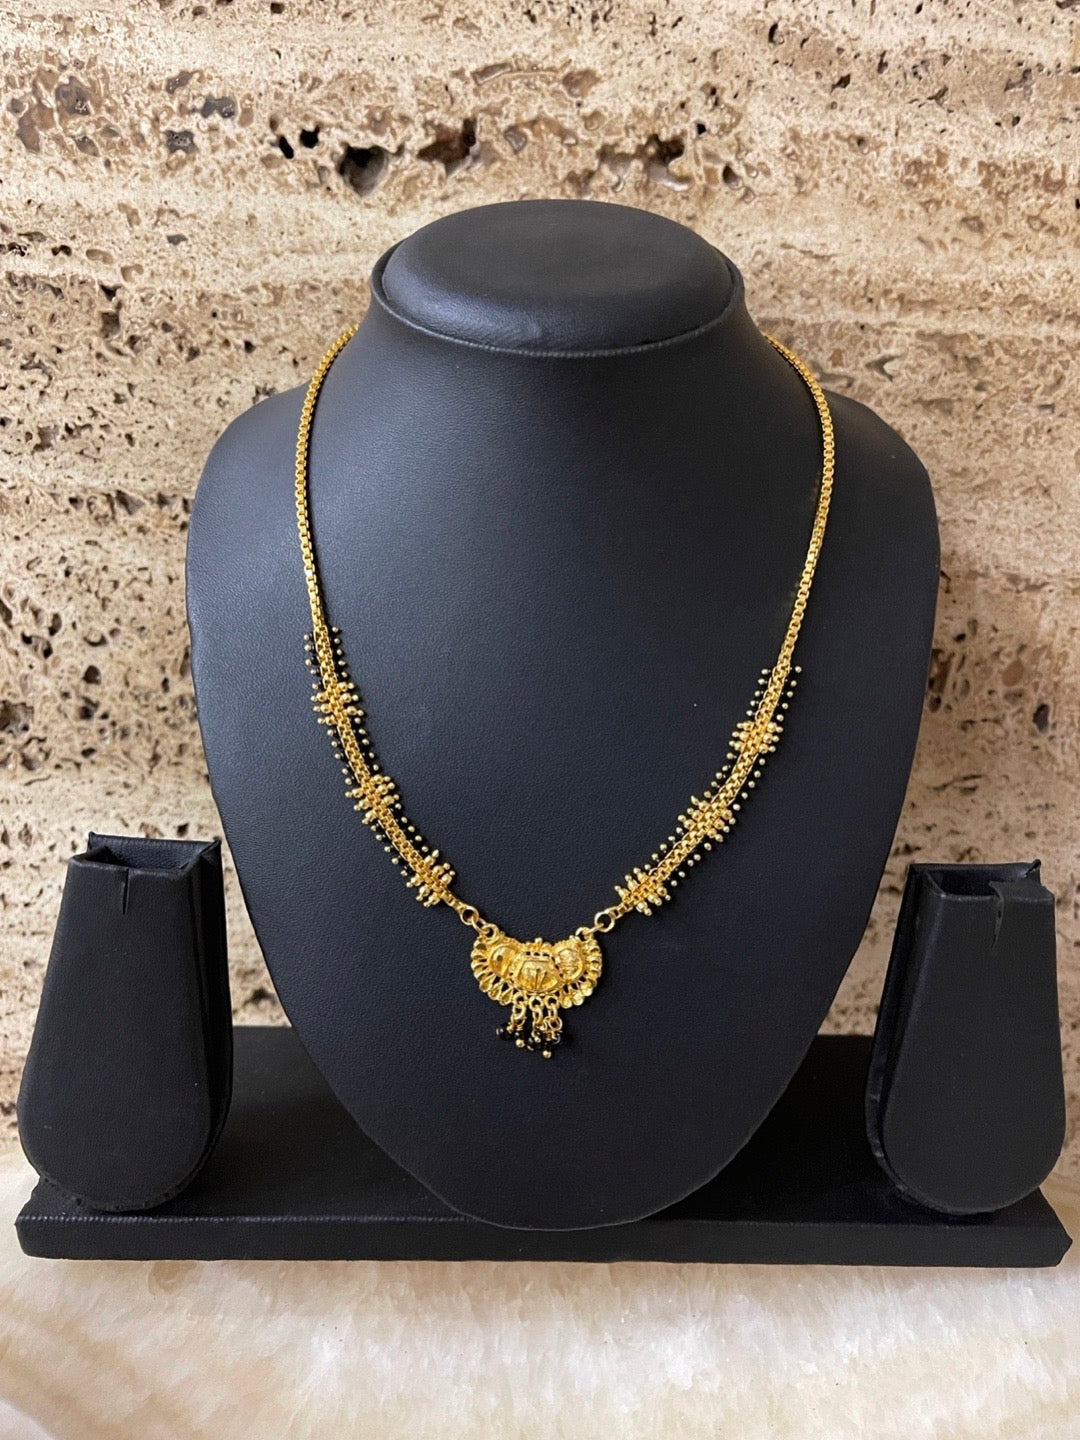 Short Mangalsutra Designs Gold Plated Latest Black & Gold Beads Single Layer Mangalsutra